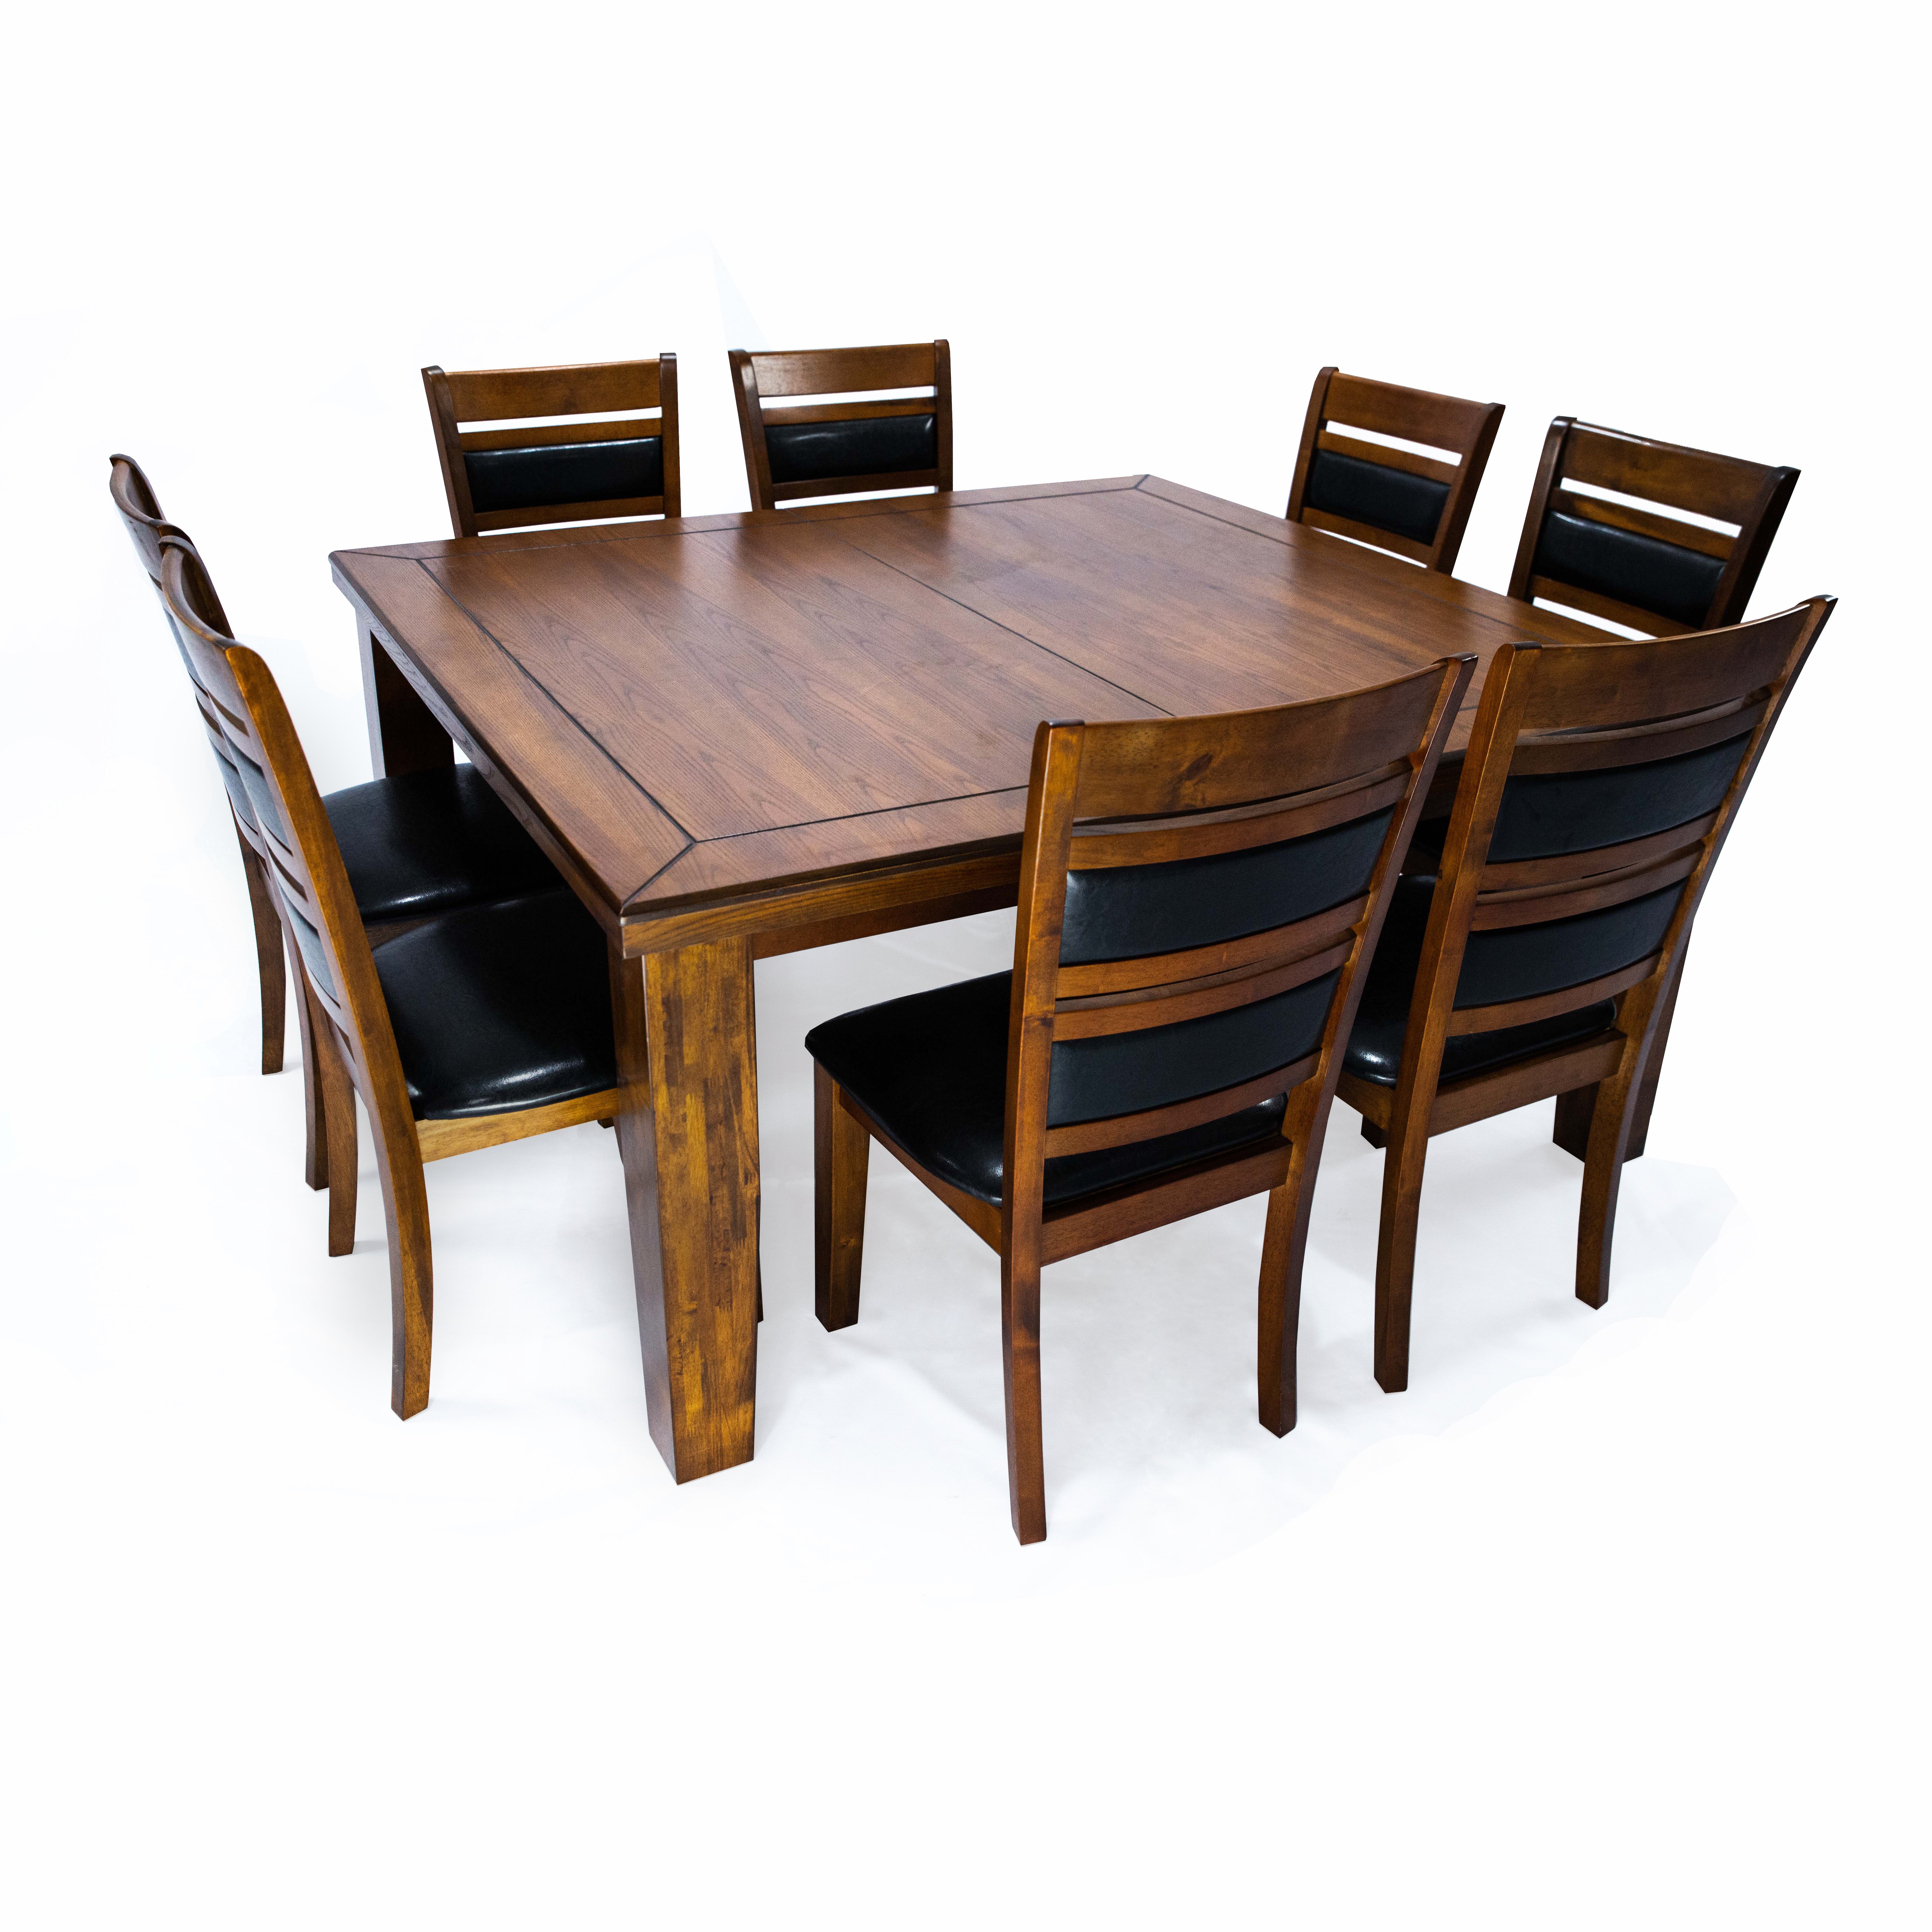 8 Seater Dining Table Briana Home Style Depot